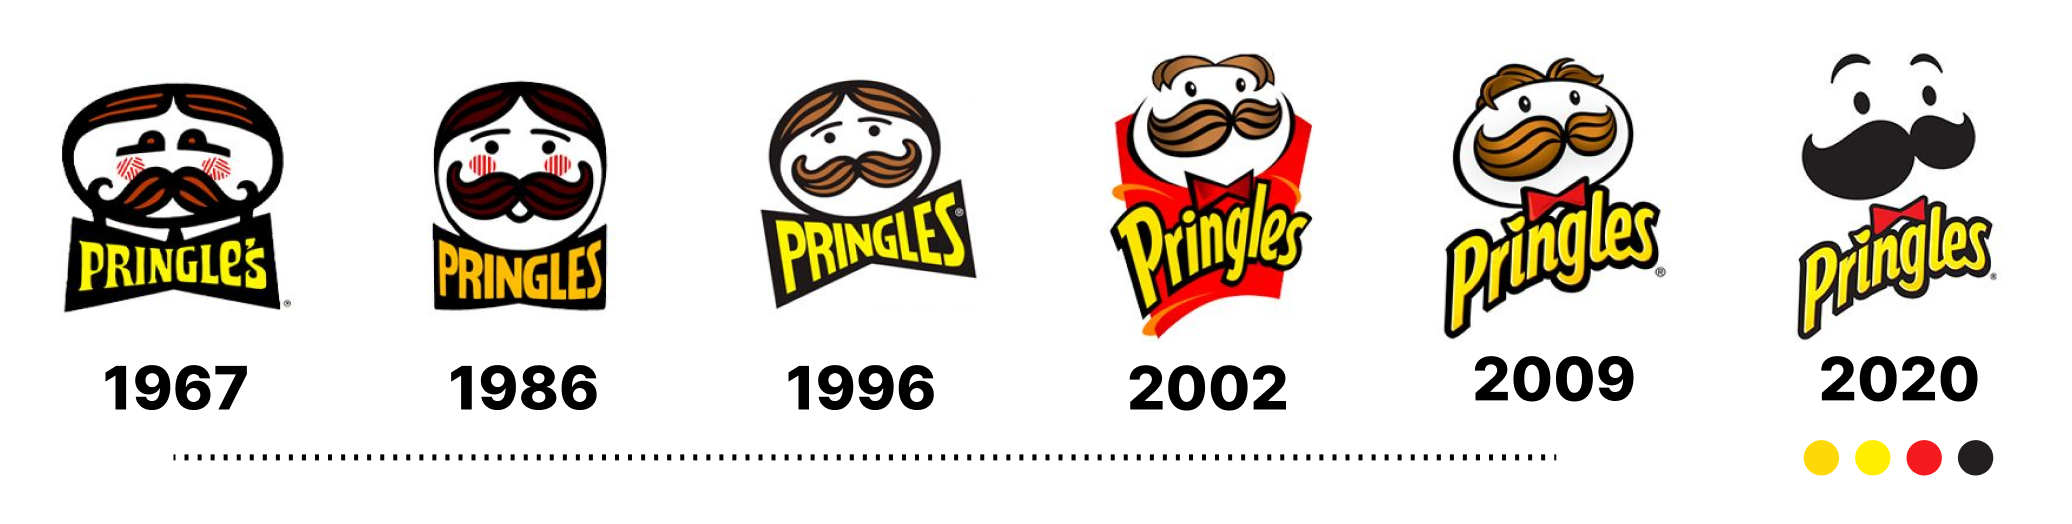 Pringles Logo Over The Years - IMAGESEE